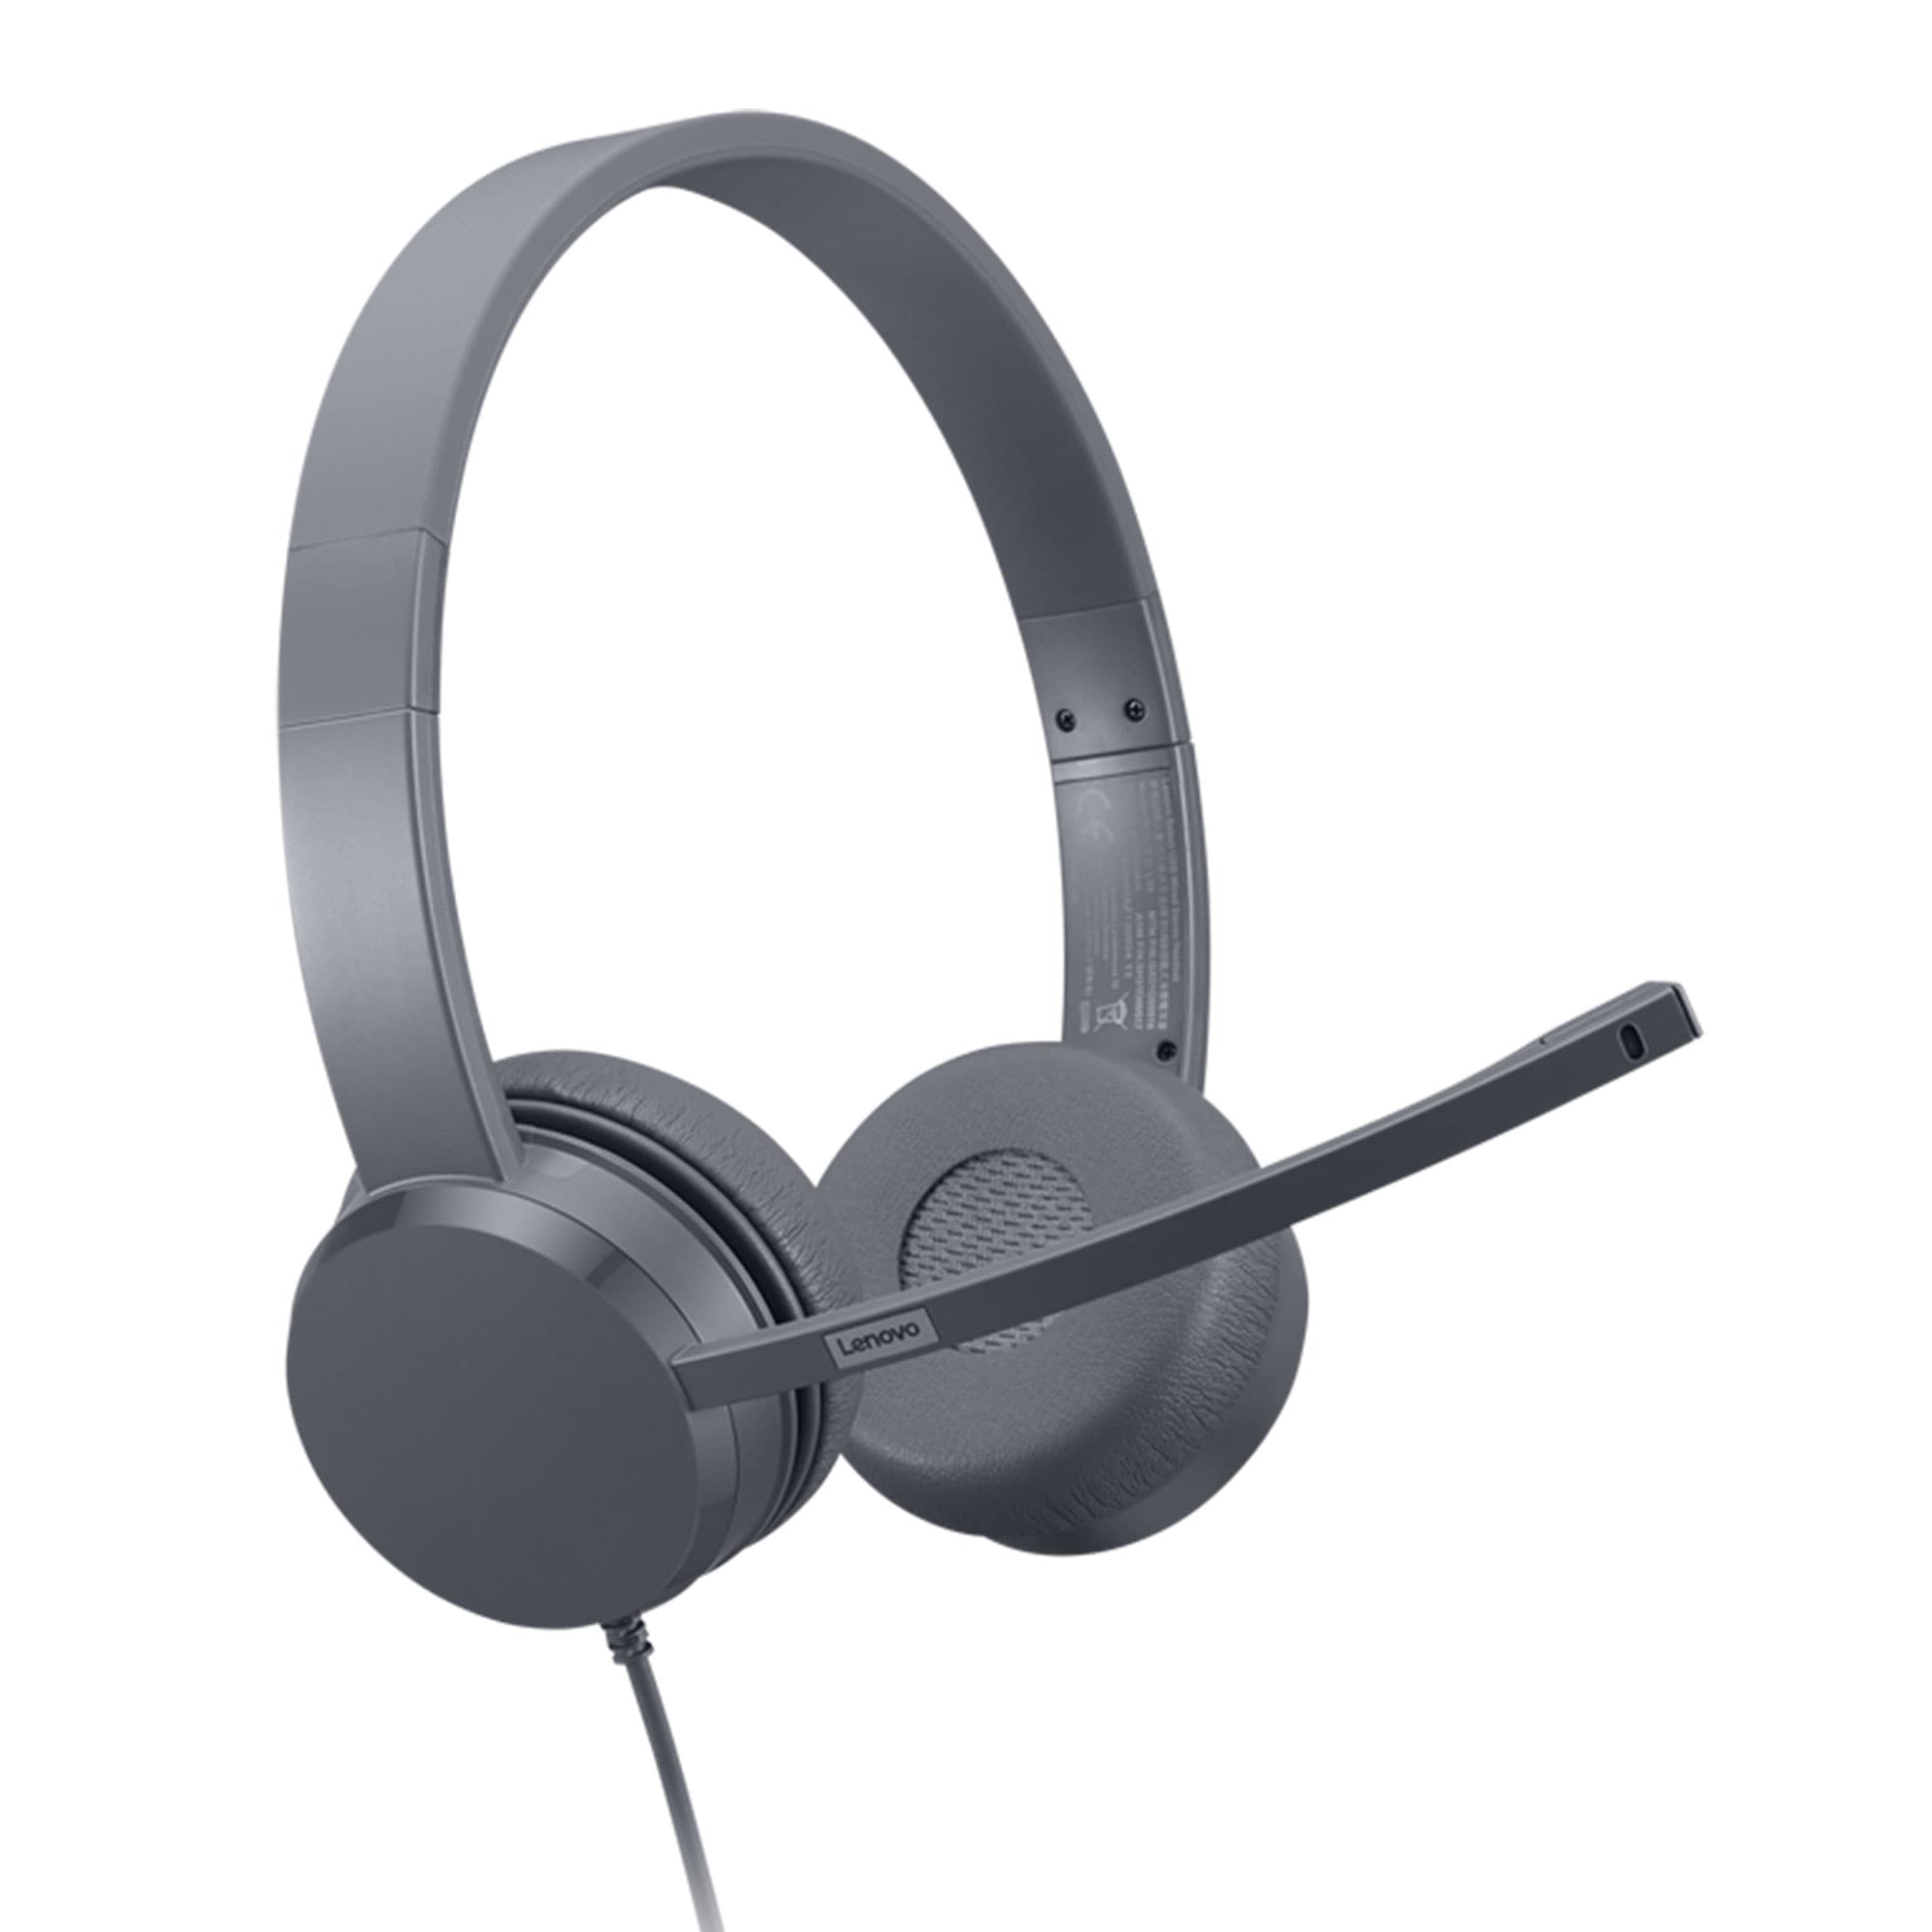 Lenovo Select USB Wired Stereo Headset - image 2 of 5